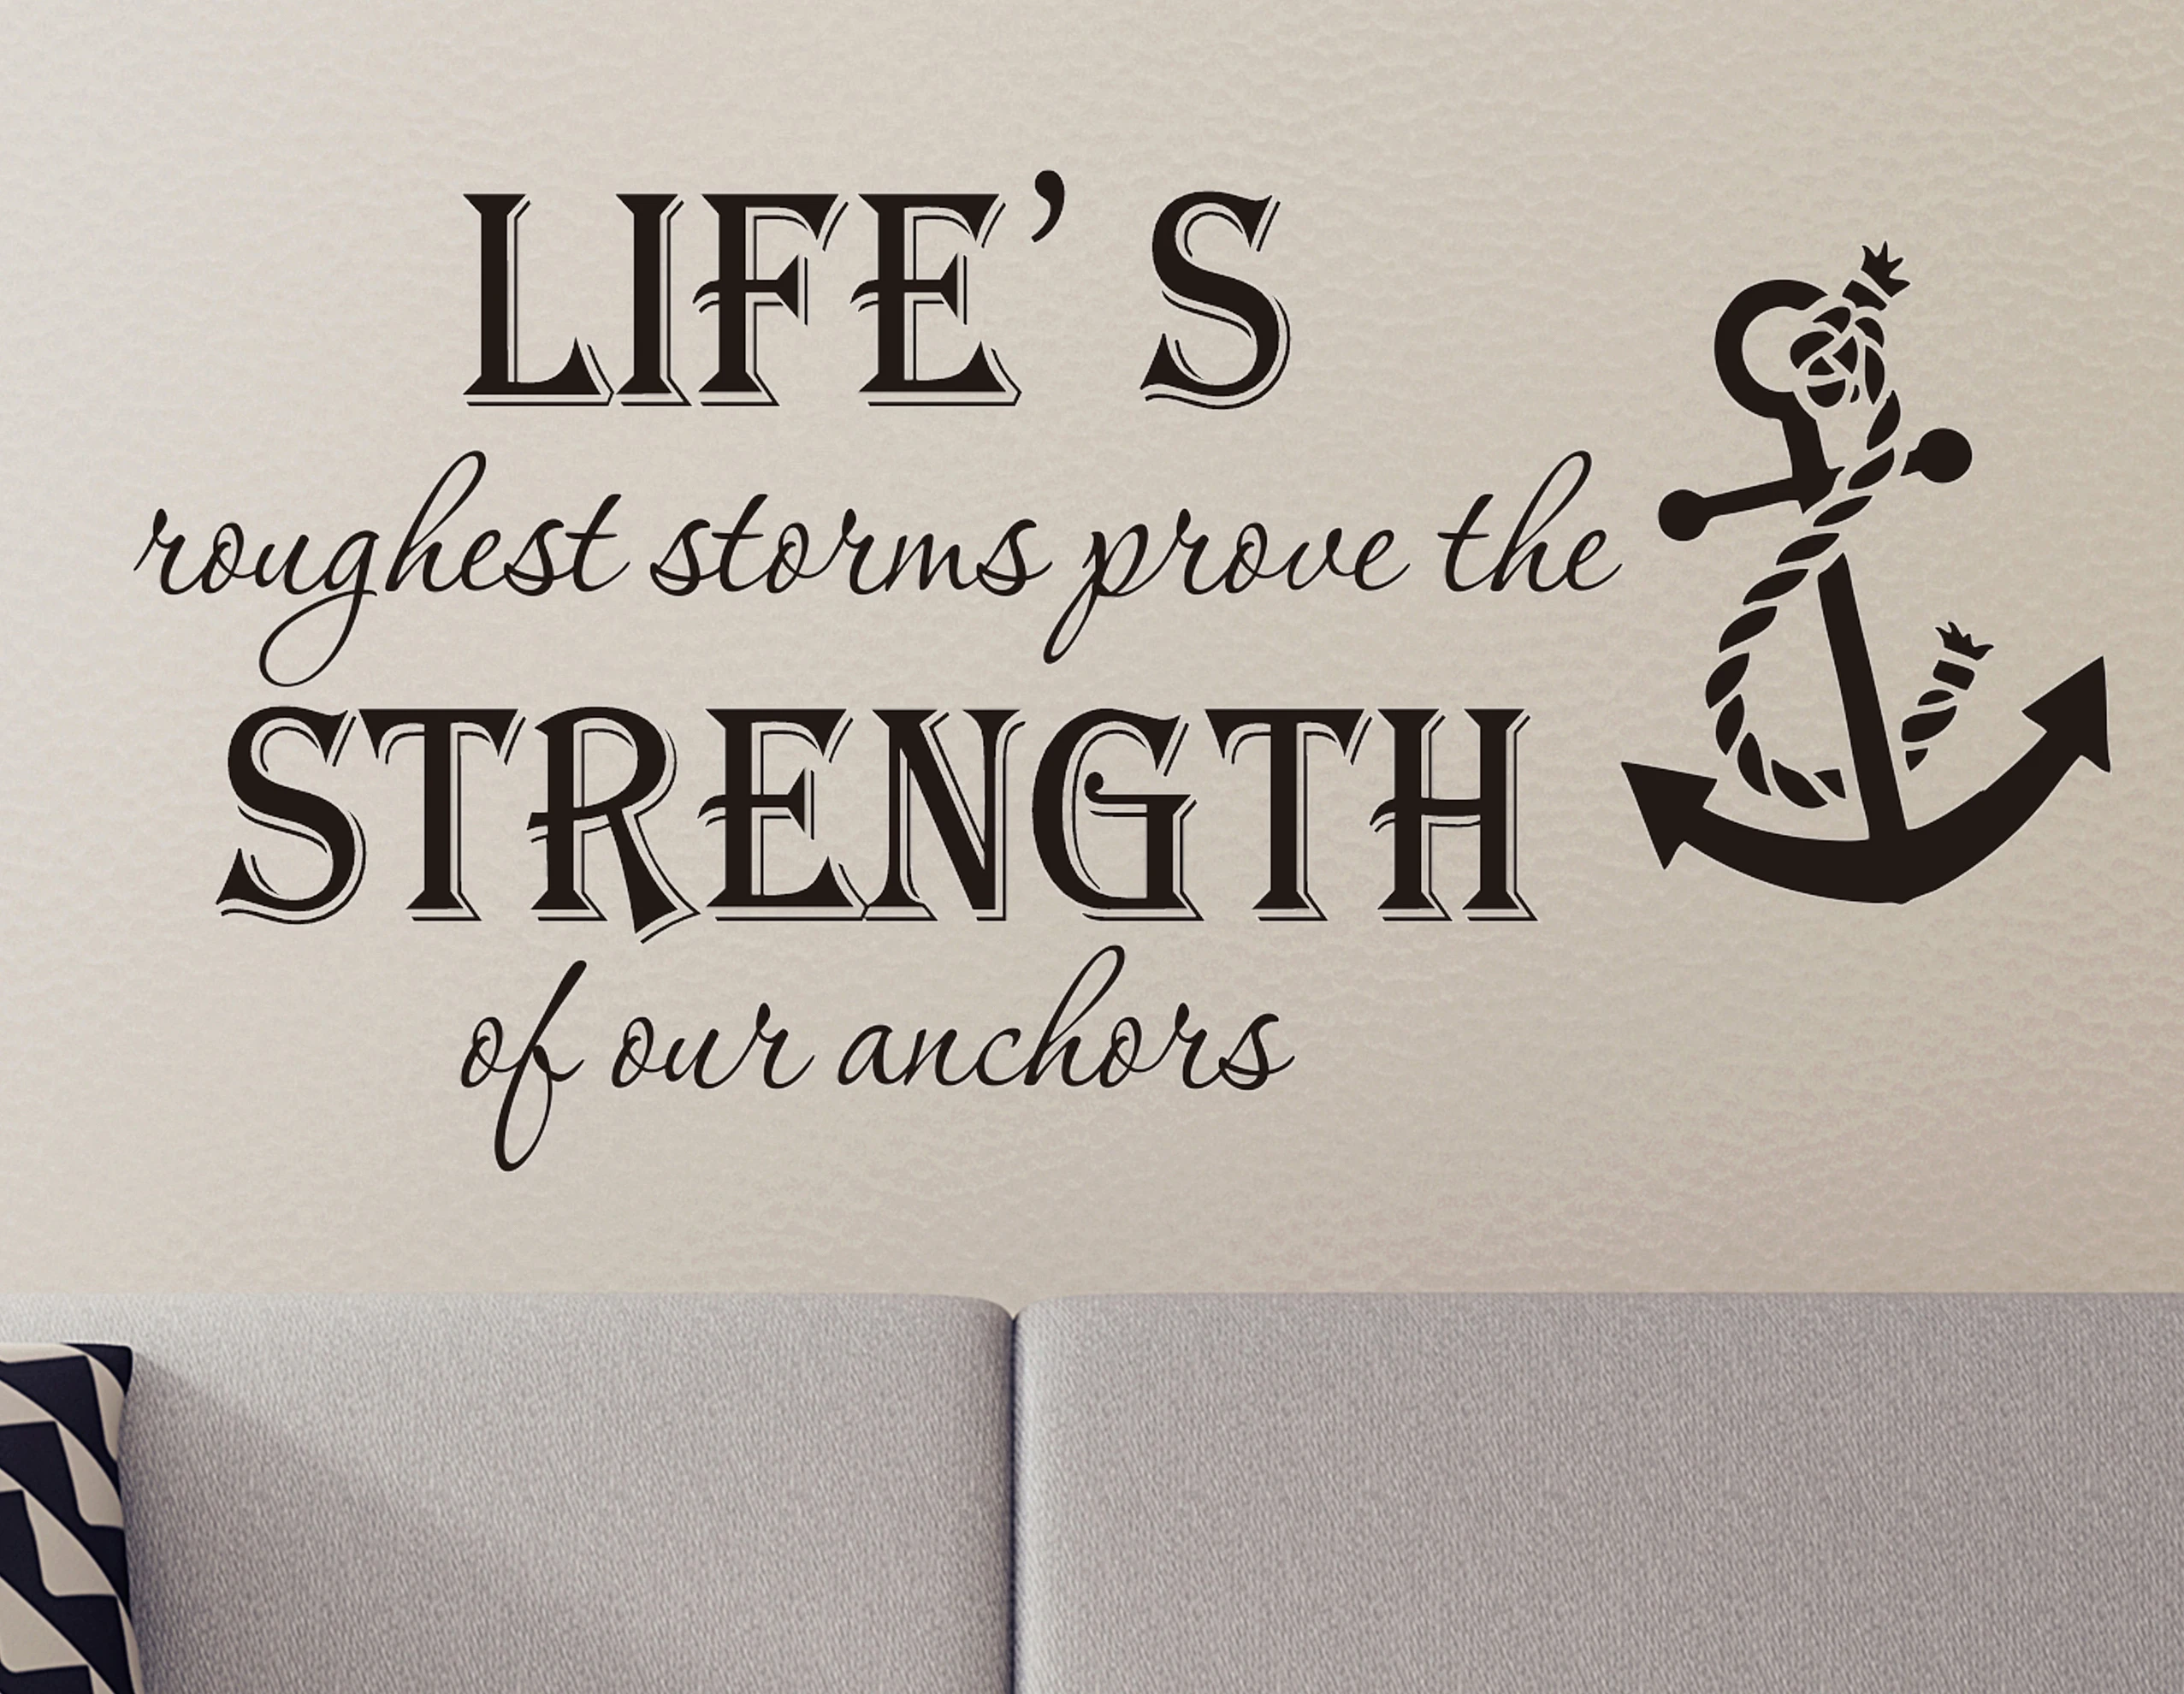 

LIFE'S ROUGHEST STORMS PROVE STRENGTH QUOTE Wall Art Stickers Wall Decals DIY Home Decoration Removable Room Decor Wall Stickers